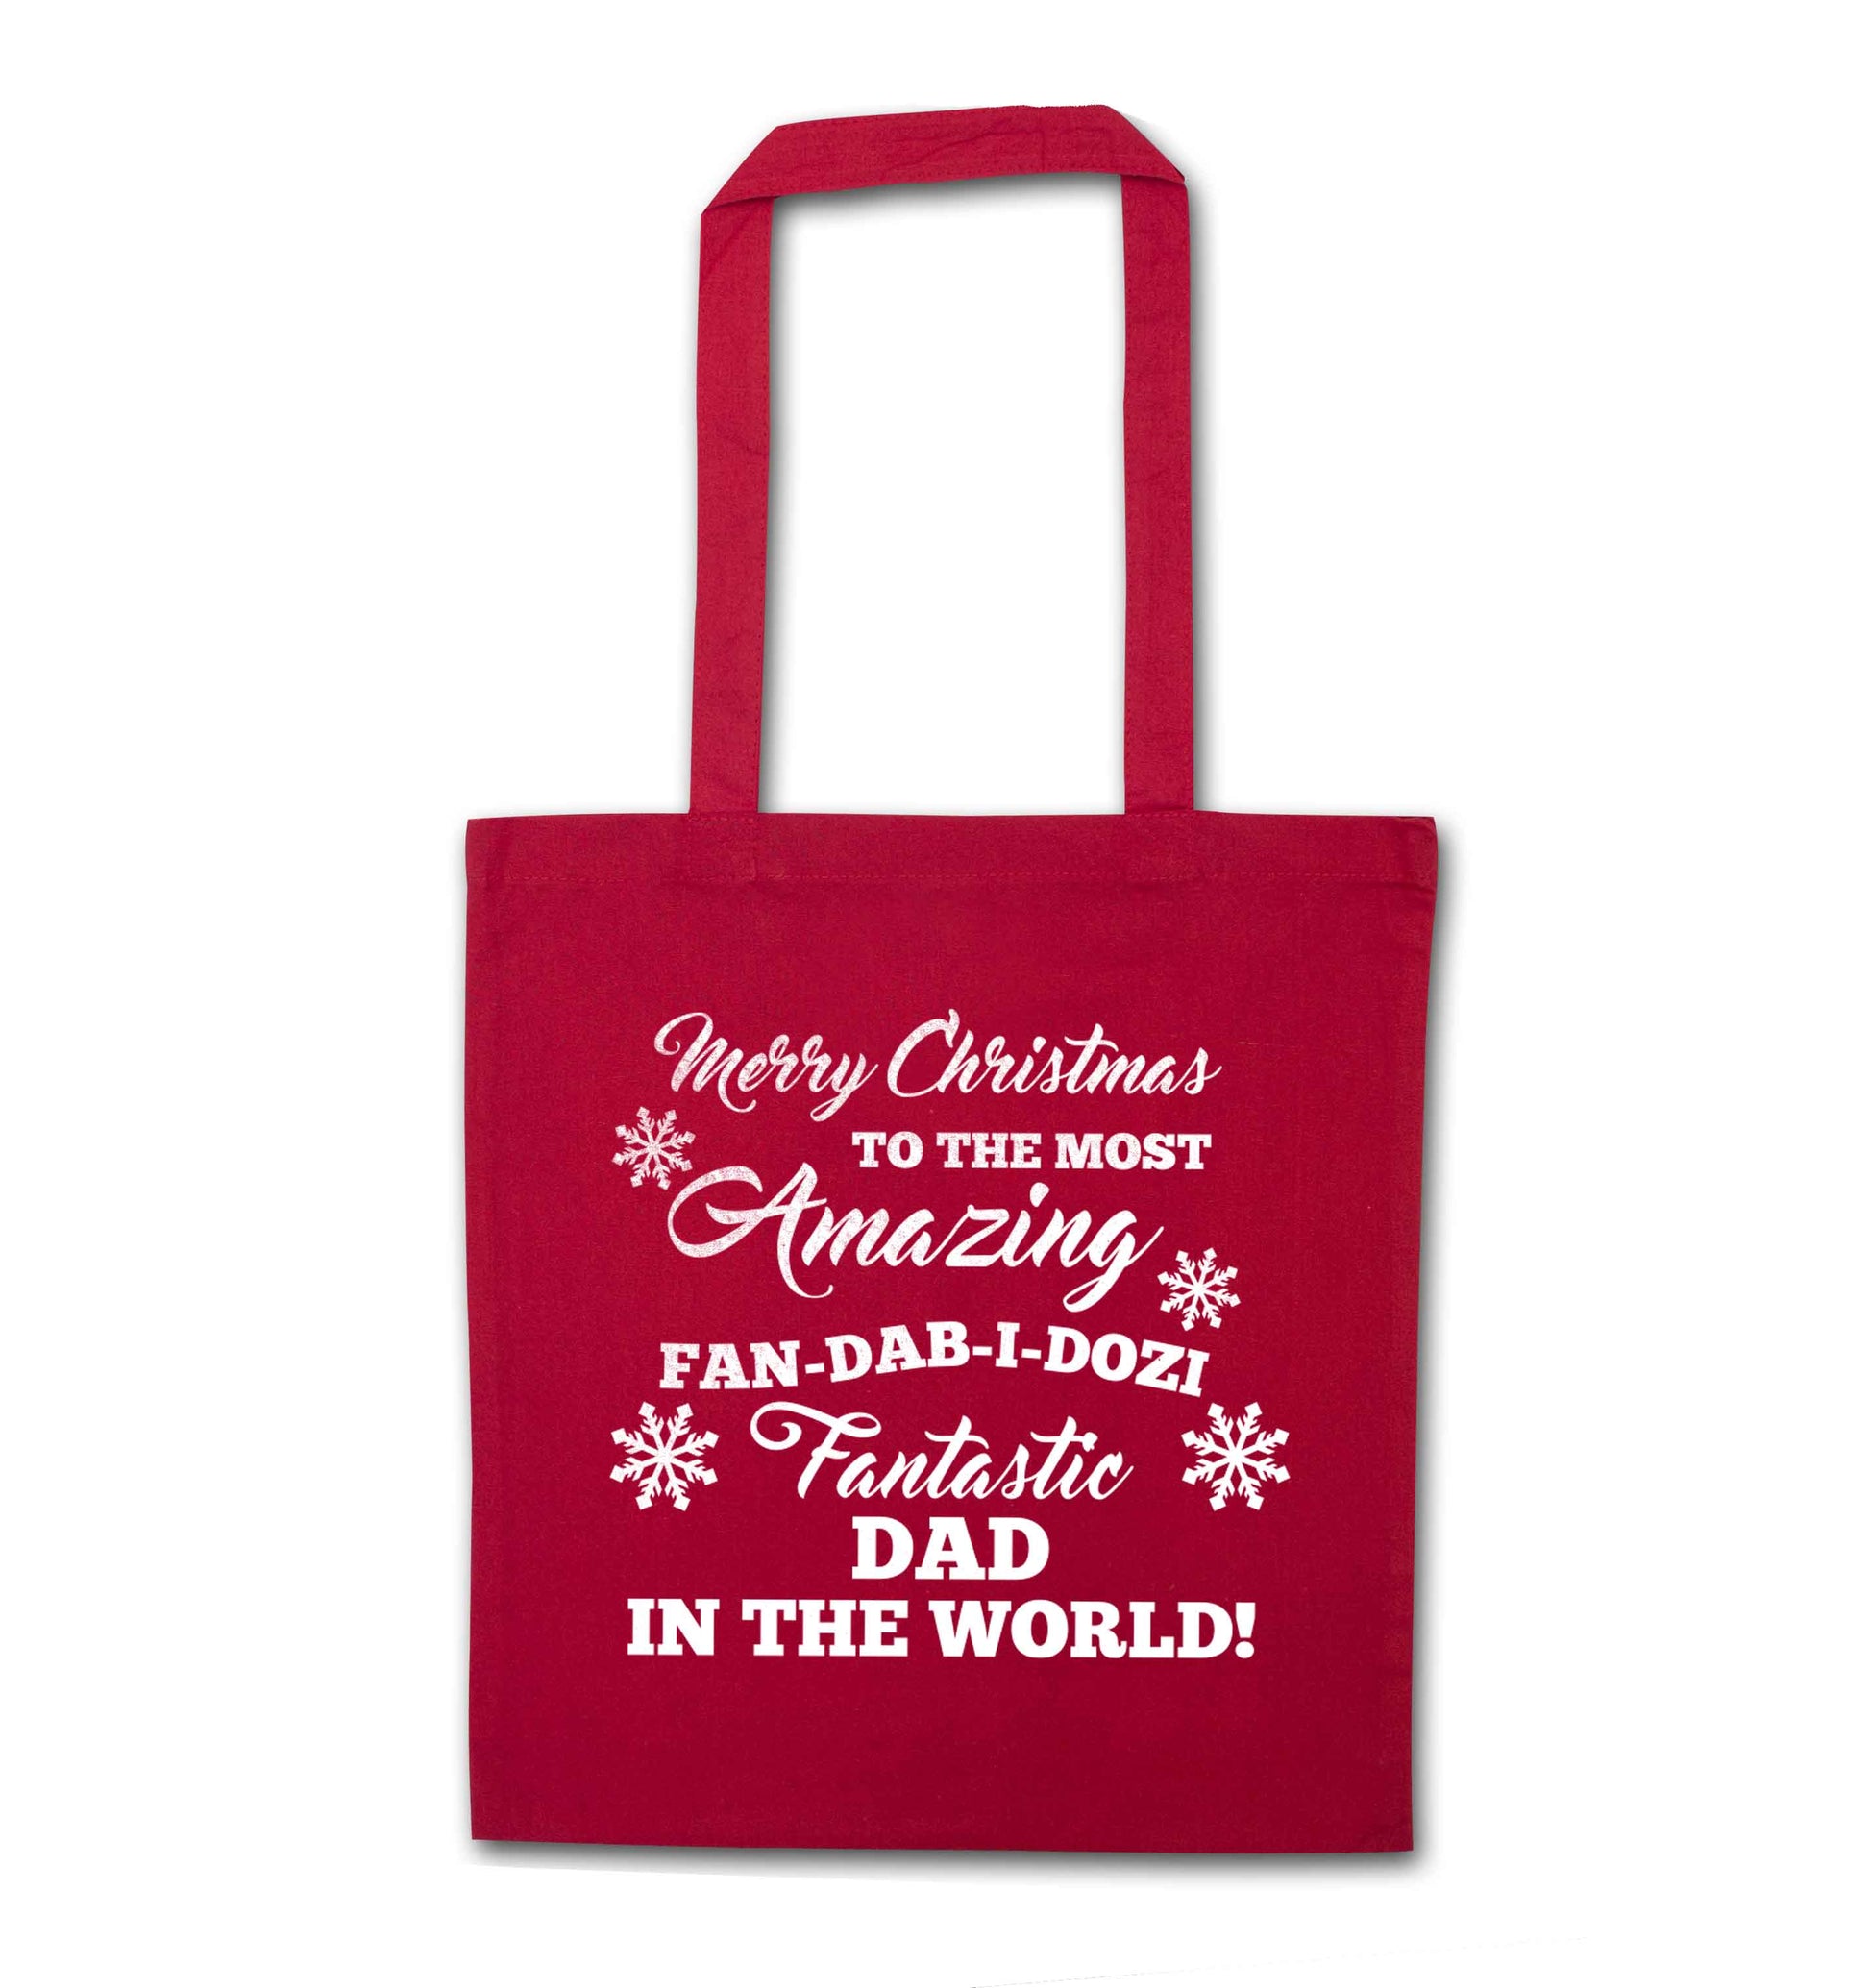 Merry Christmas to the most amazing fan-dab-i-dozi fantasic Dad in the world red tote bag